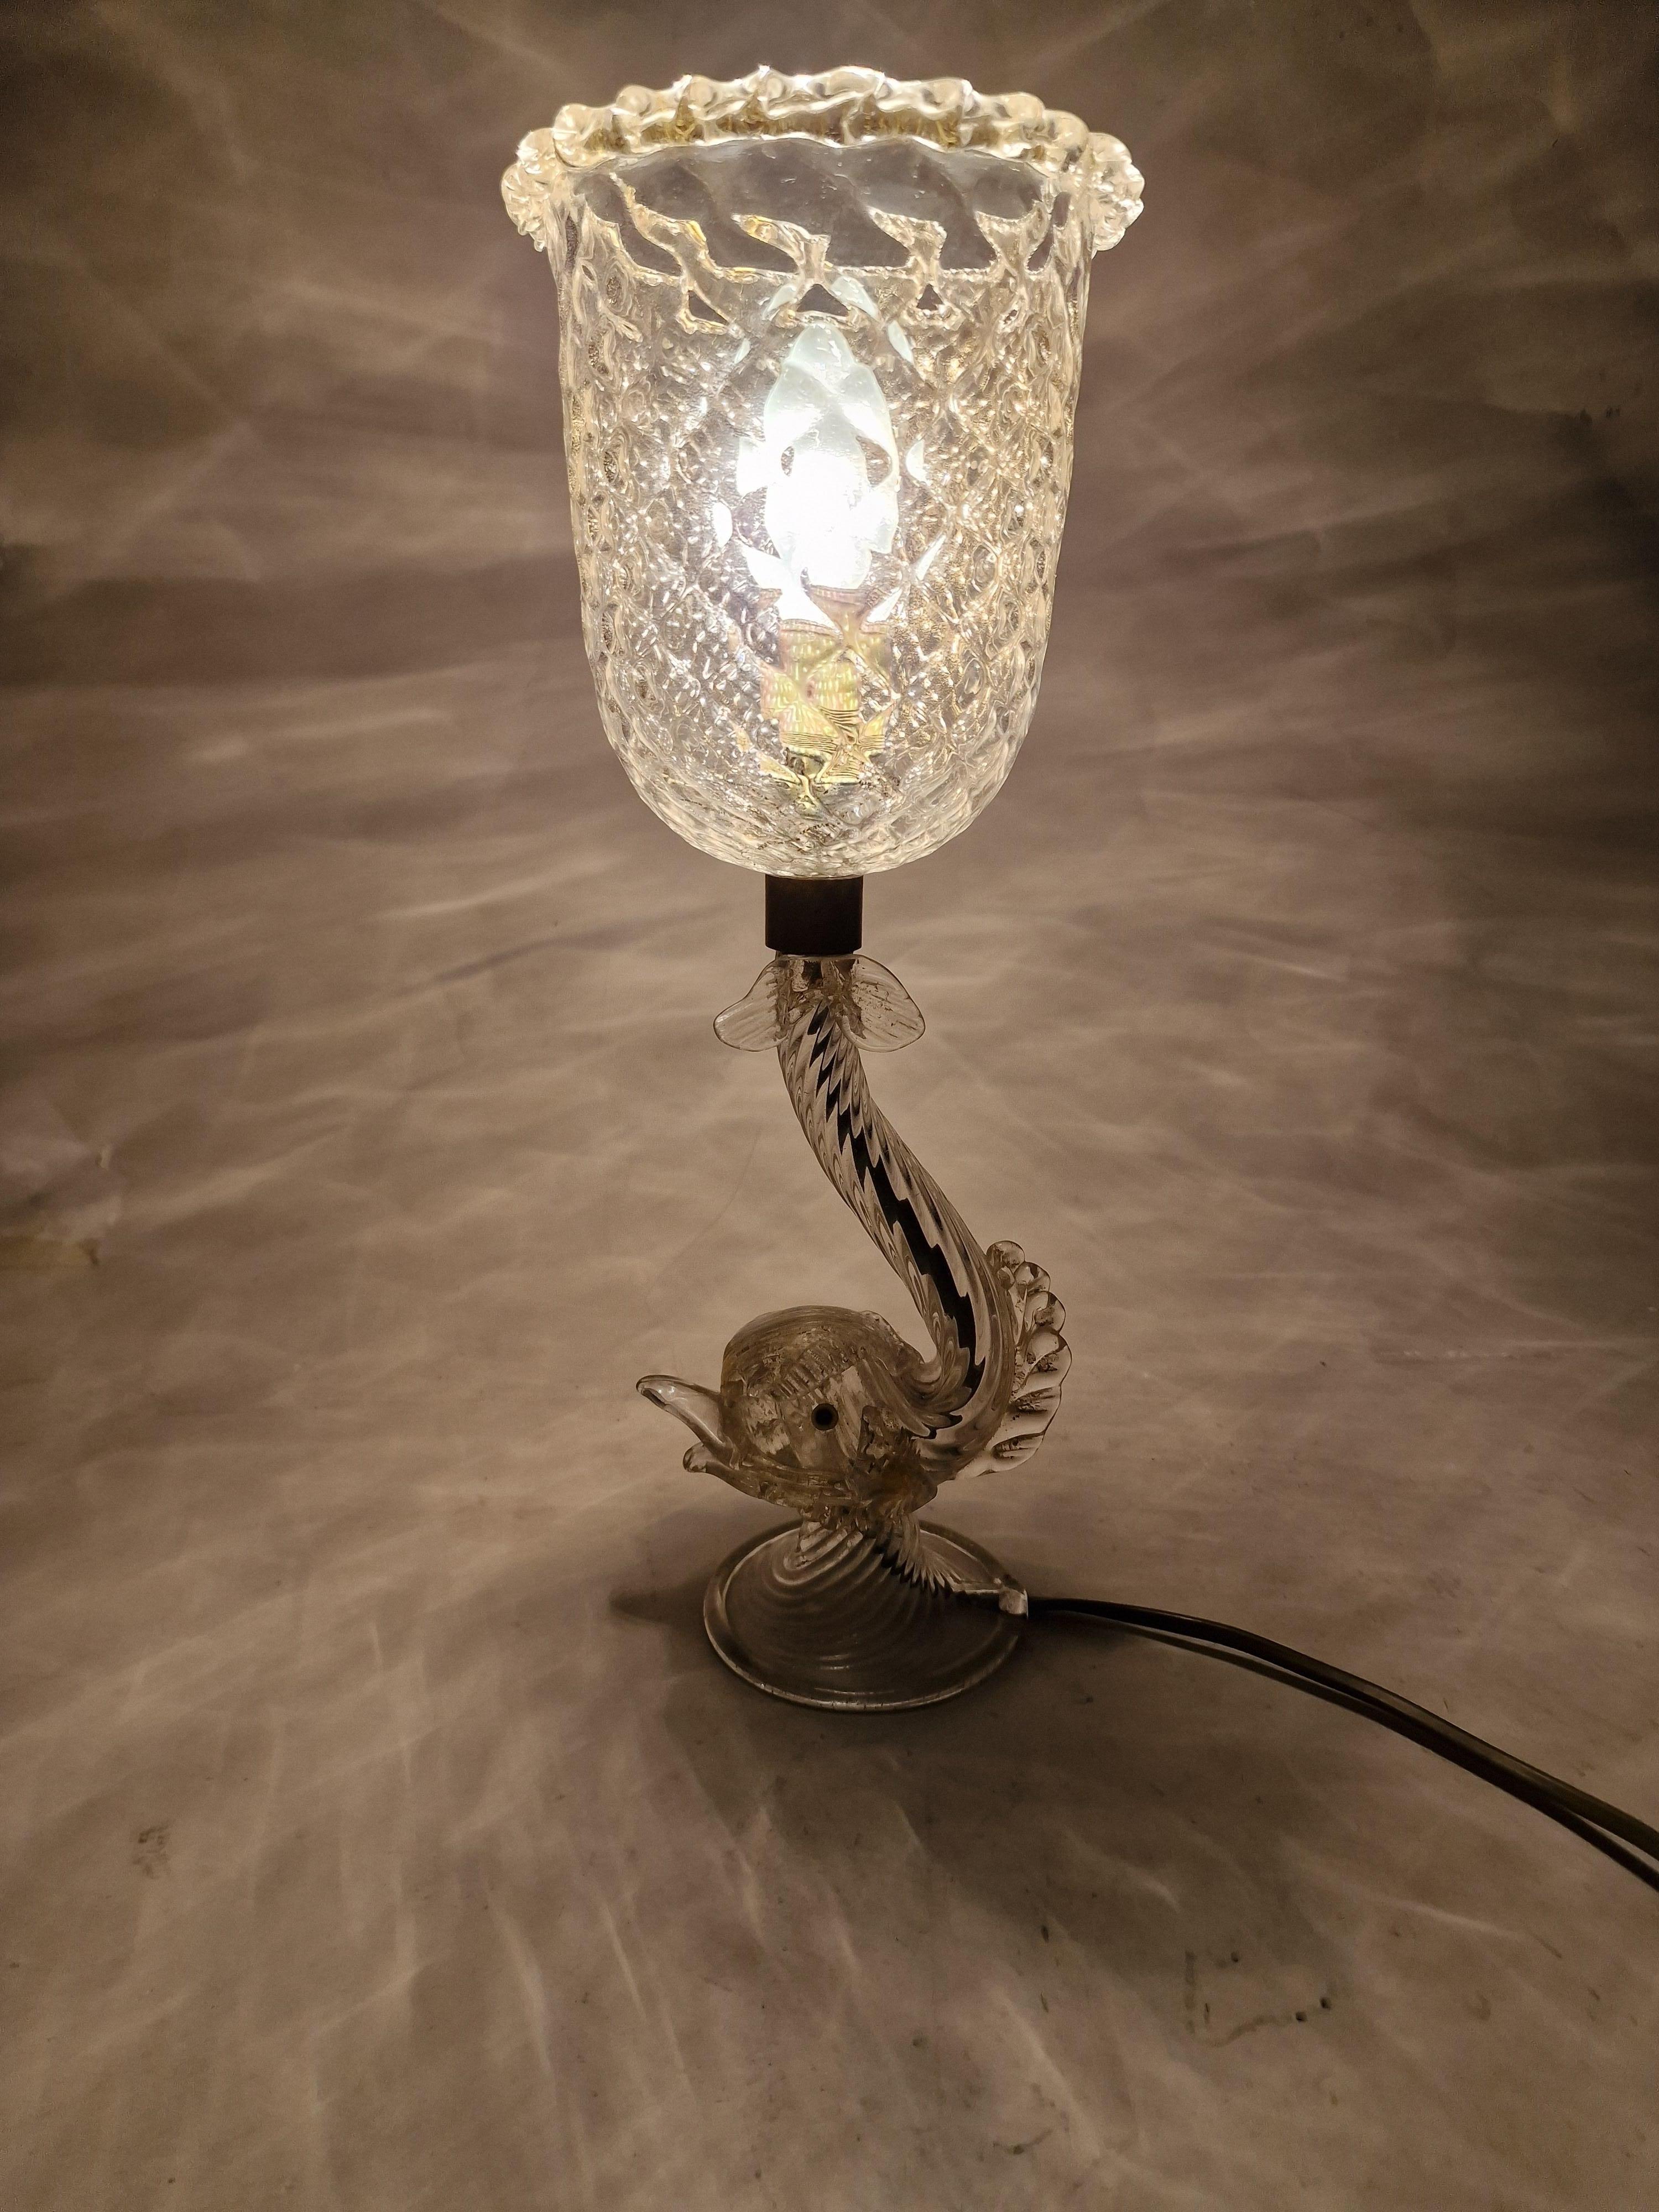 This spectacular table lamp was made at the world-famous glass factory  island of Murano, Venice in Italy. This object is made of masterfully hand-blown glass, made using an old process in the 1960s.

The colorless glass was covered over and over